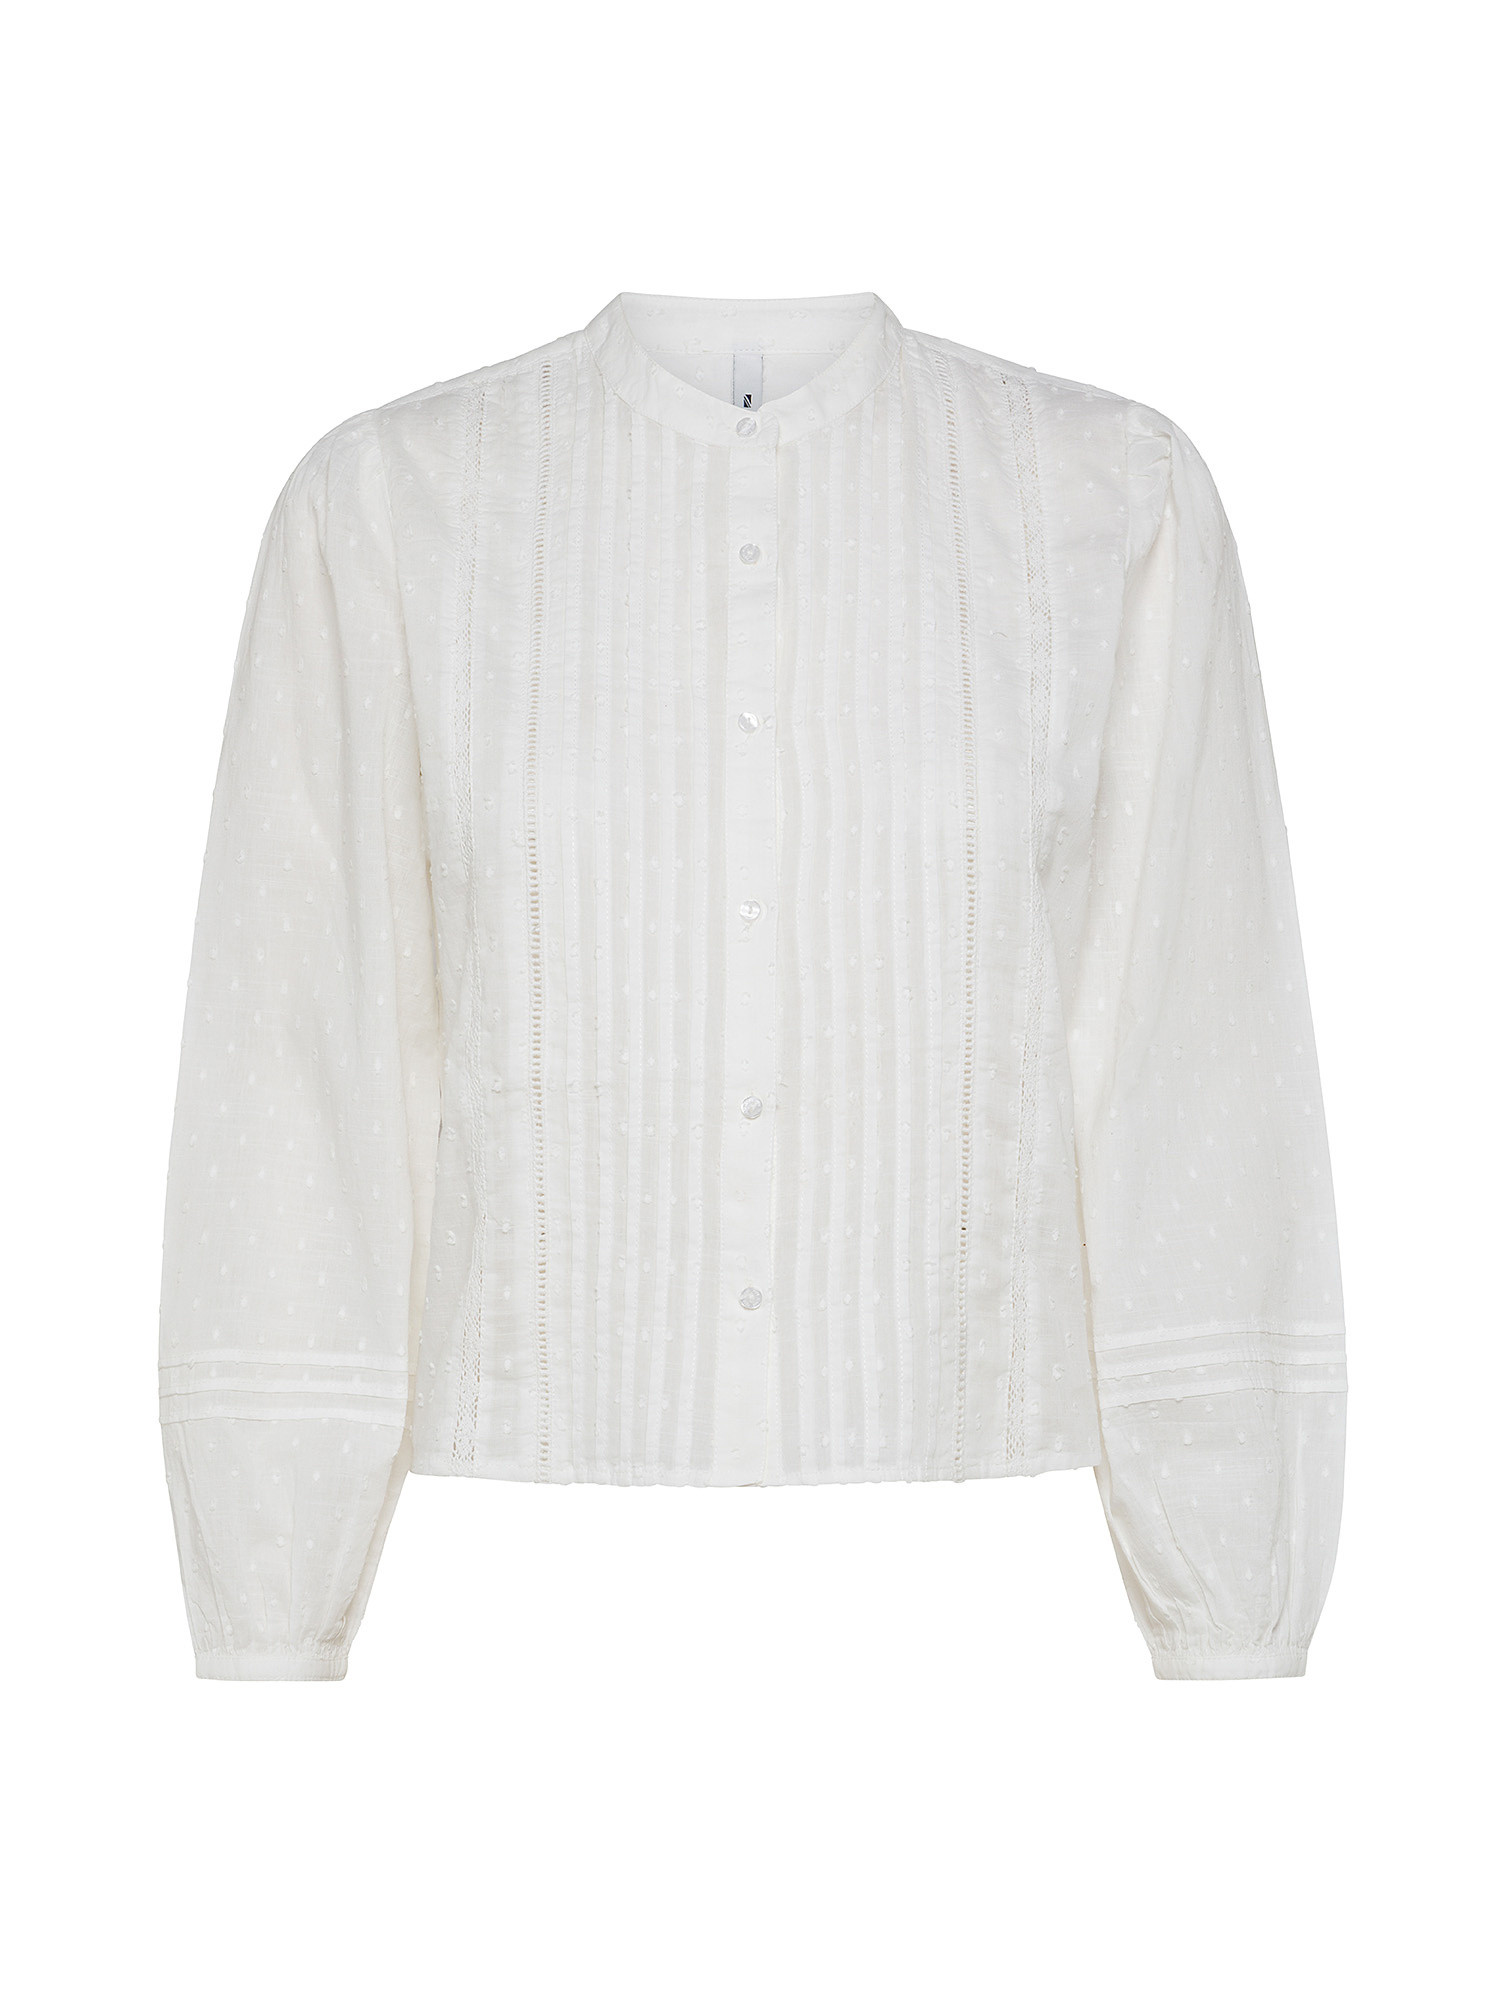 Pepe Jeans -  Blusa in cotone con ricami, Bianco, large image number 0